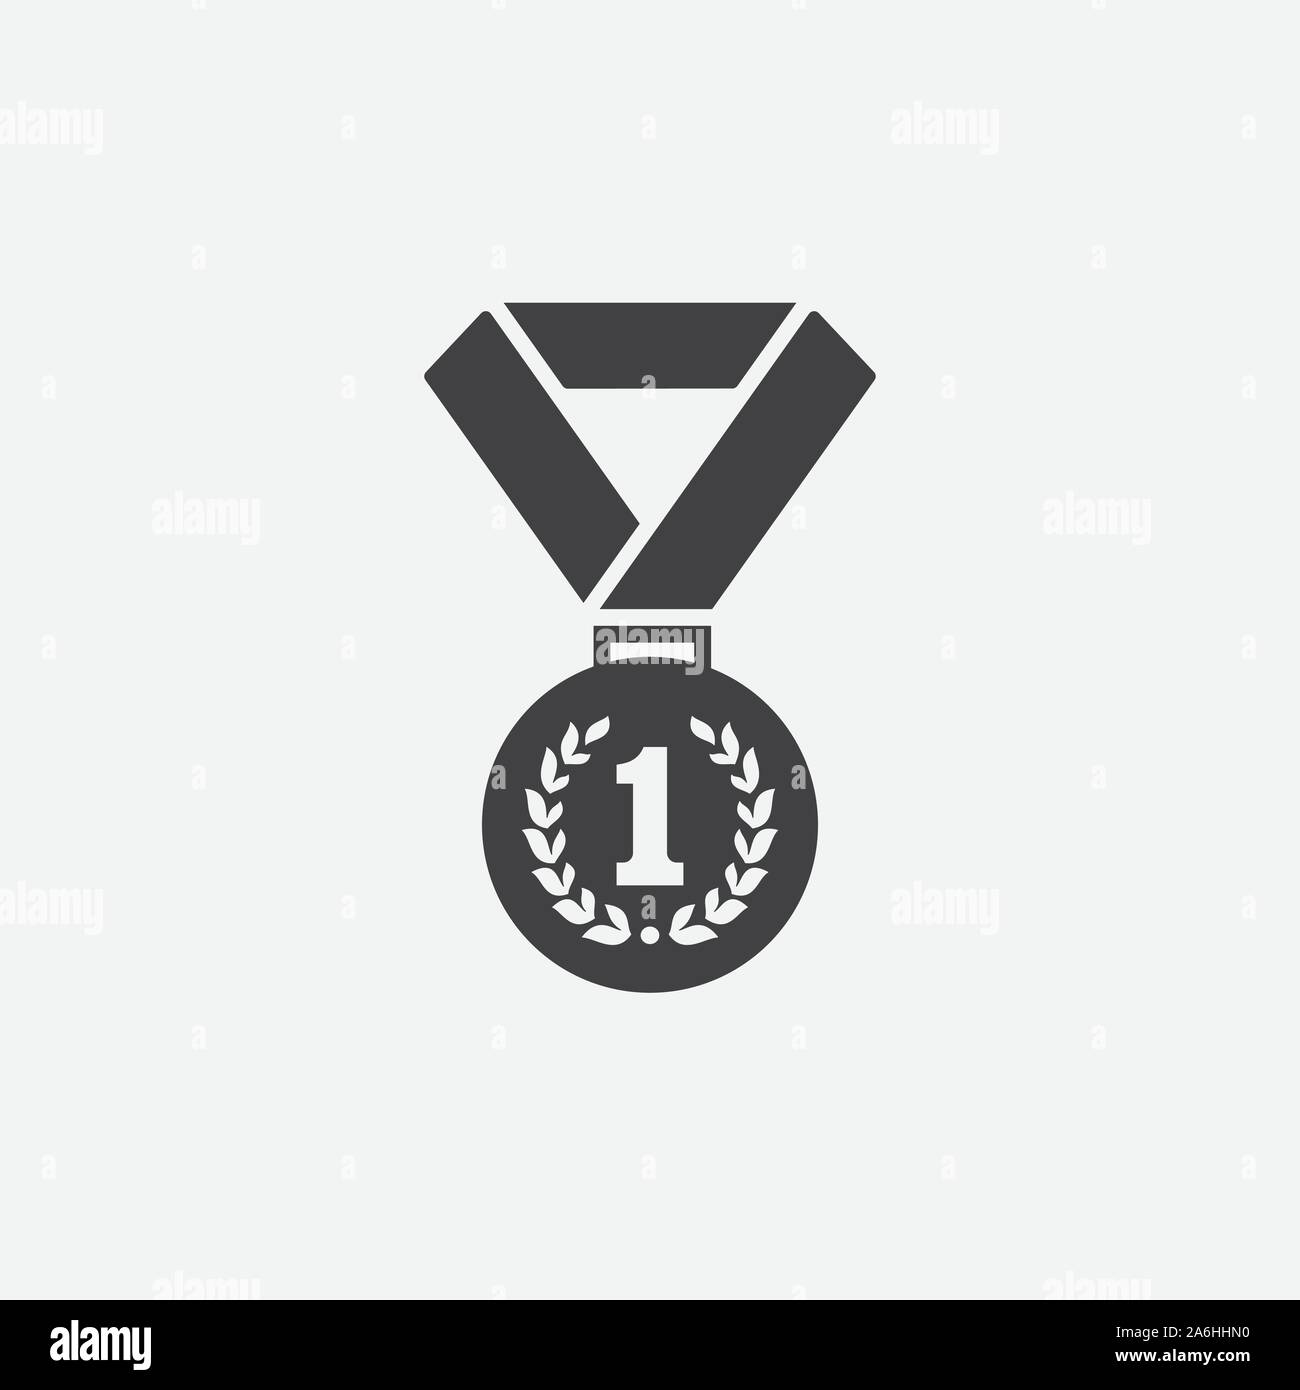 medal logo Template vector illustration icon design, medal for first place icon, medal flat icon illustration, champions medal icon illustration, award logo Stock Vector